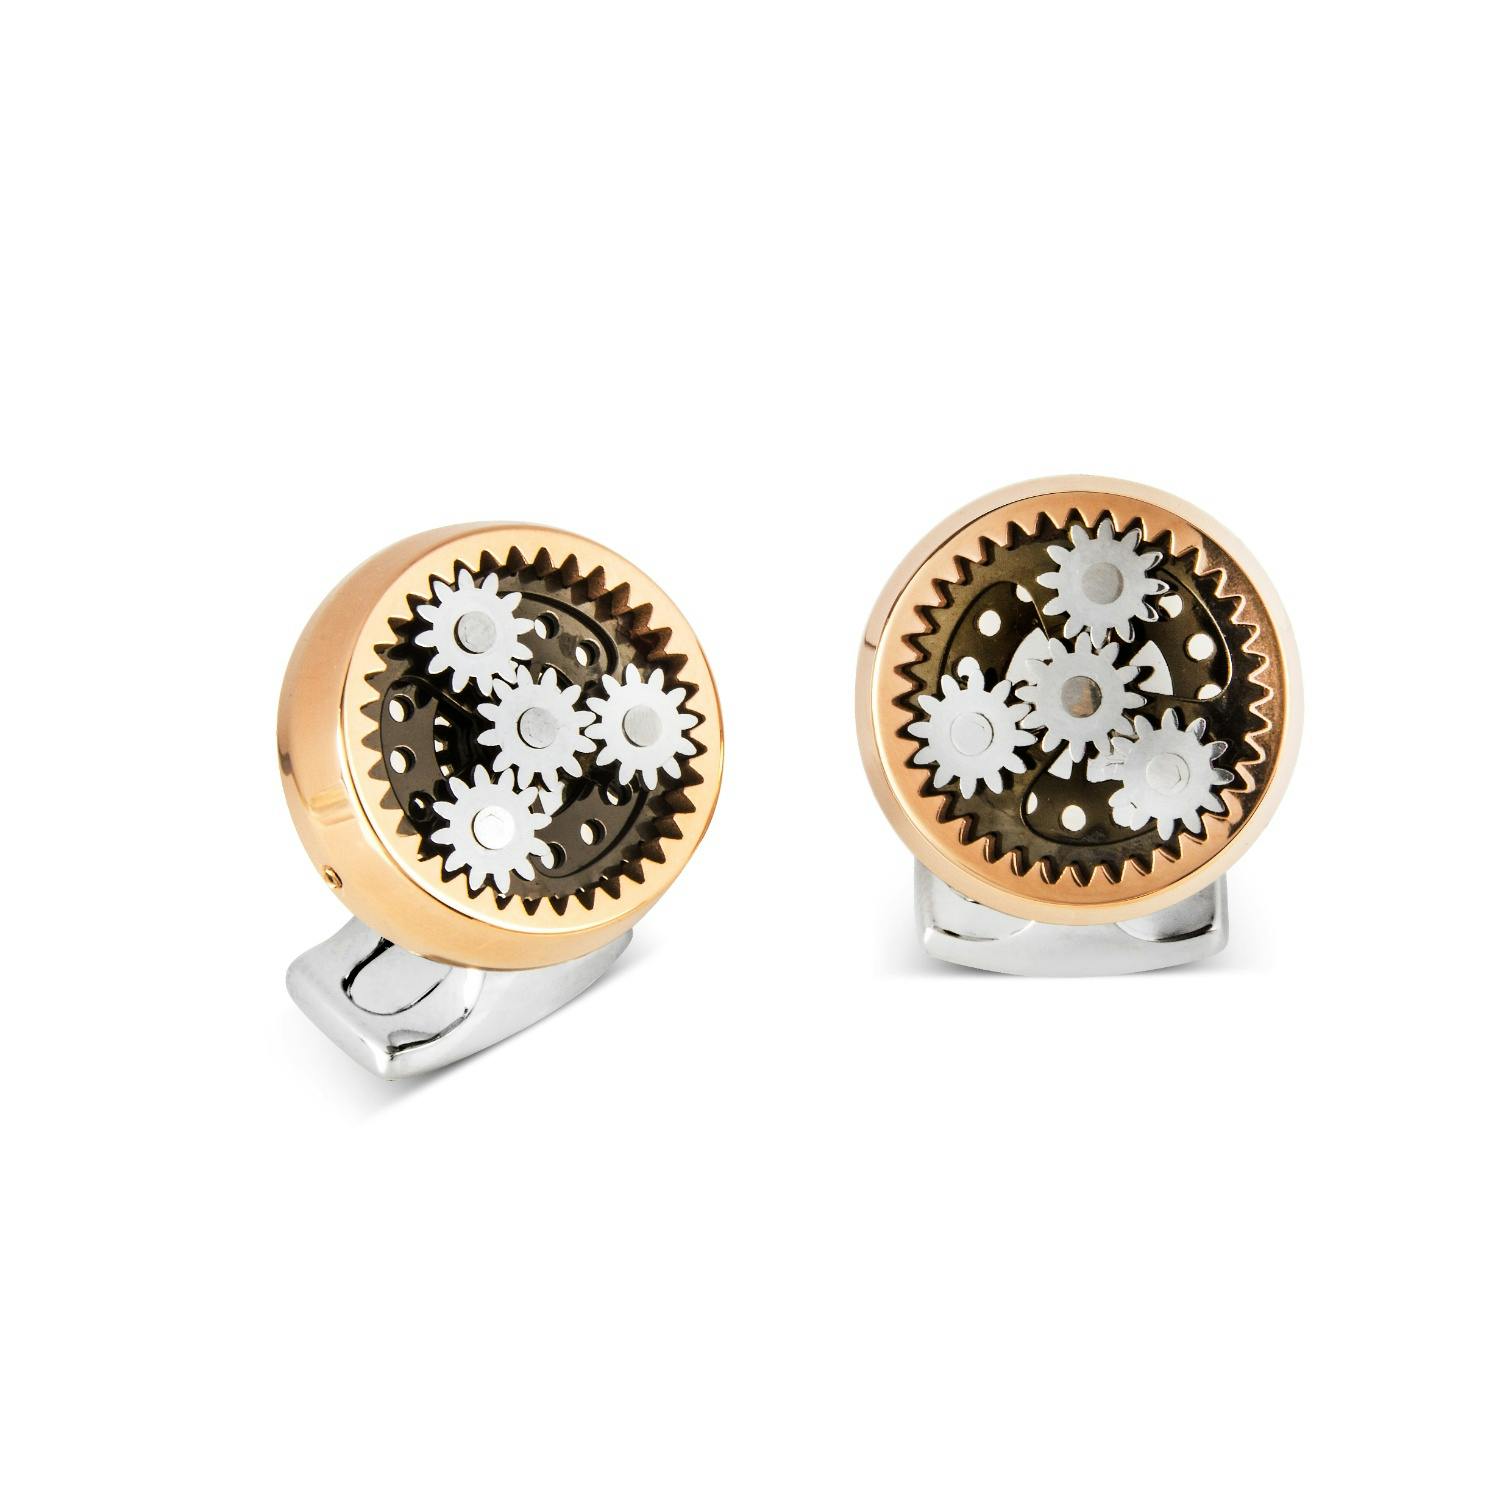 Sun and Planet Gear Cuff Links in Rose Gold 0